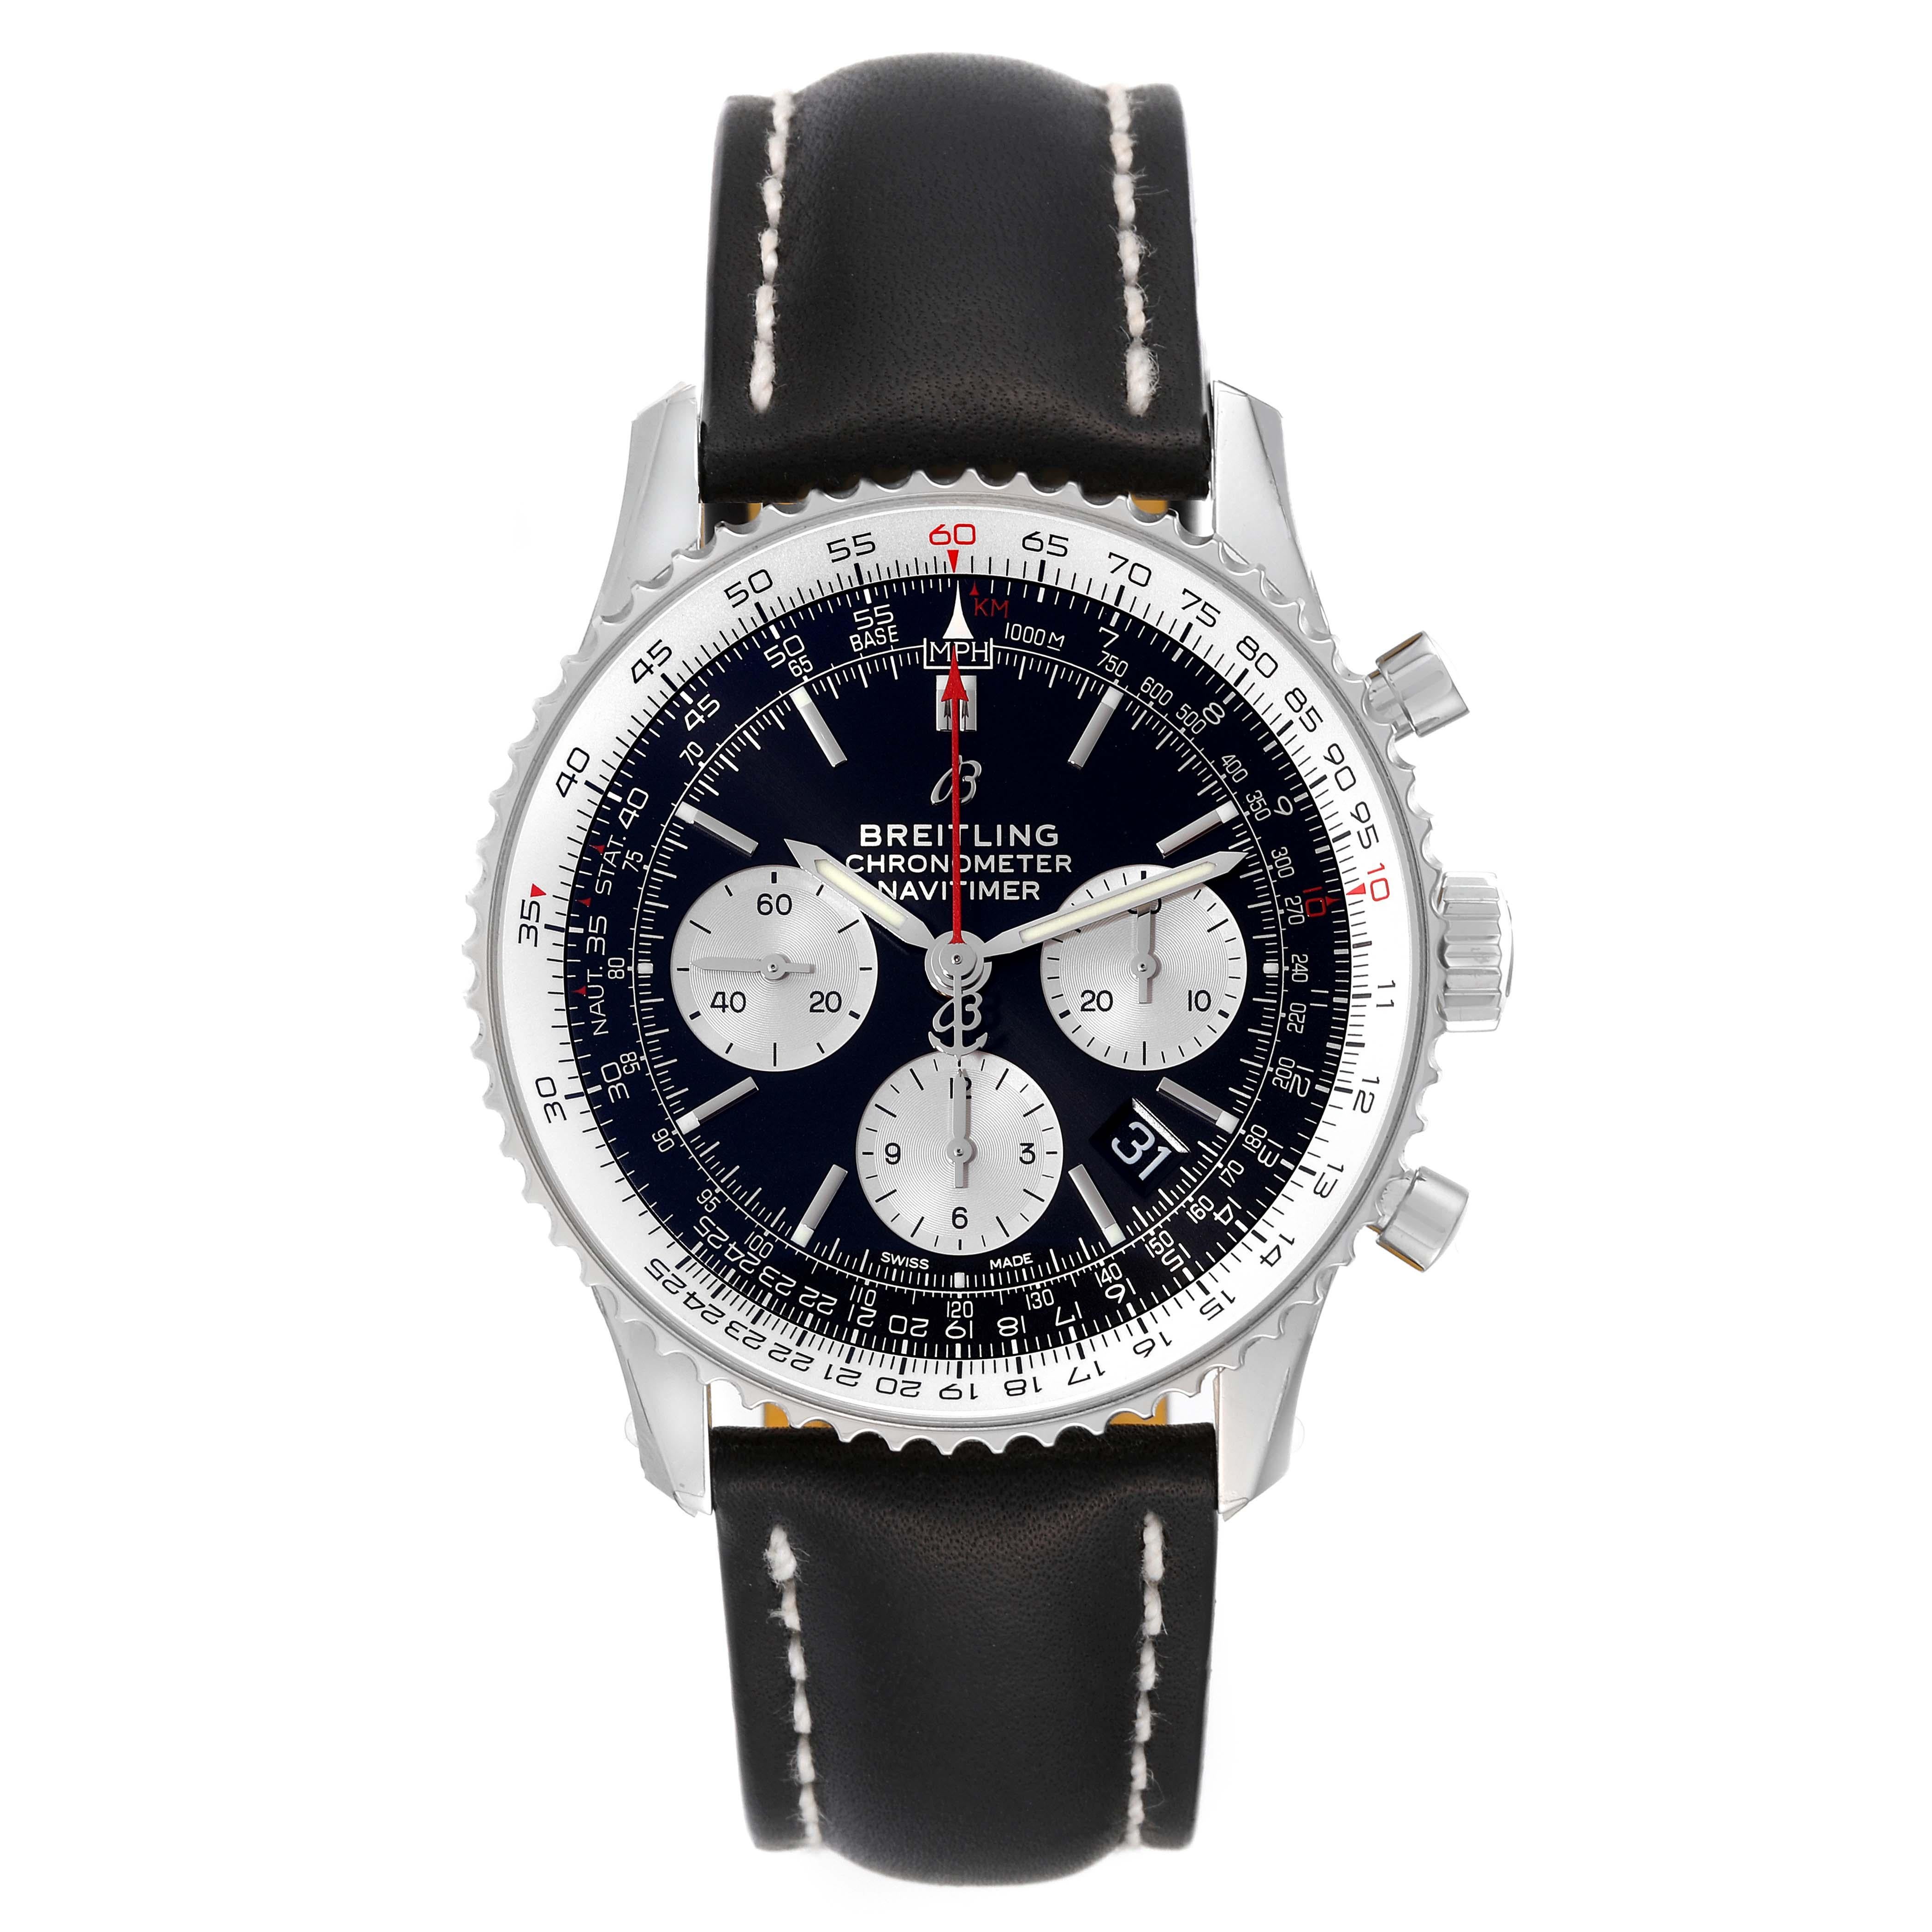 Breitling Navitimer 01 Black Dial Steel Mens Watch AB0121 Unworn. Self-winding automatic officially certified chronometer movement. Chronograph function. Stainless steel case 43 mm in diameter. Case thickness 14.25 mm. Transparent exhibition